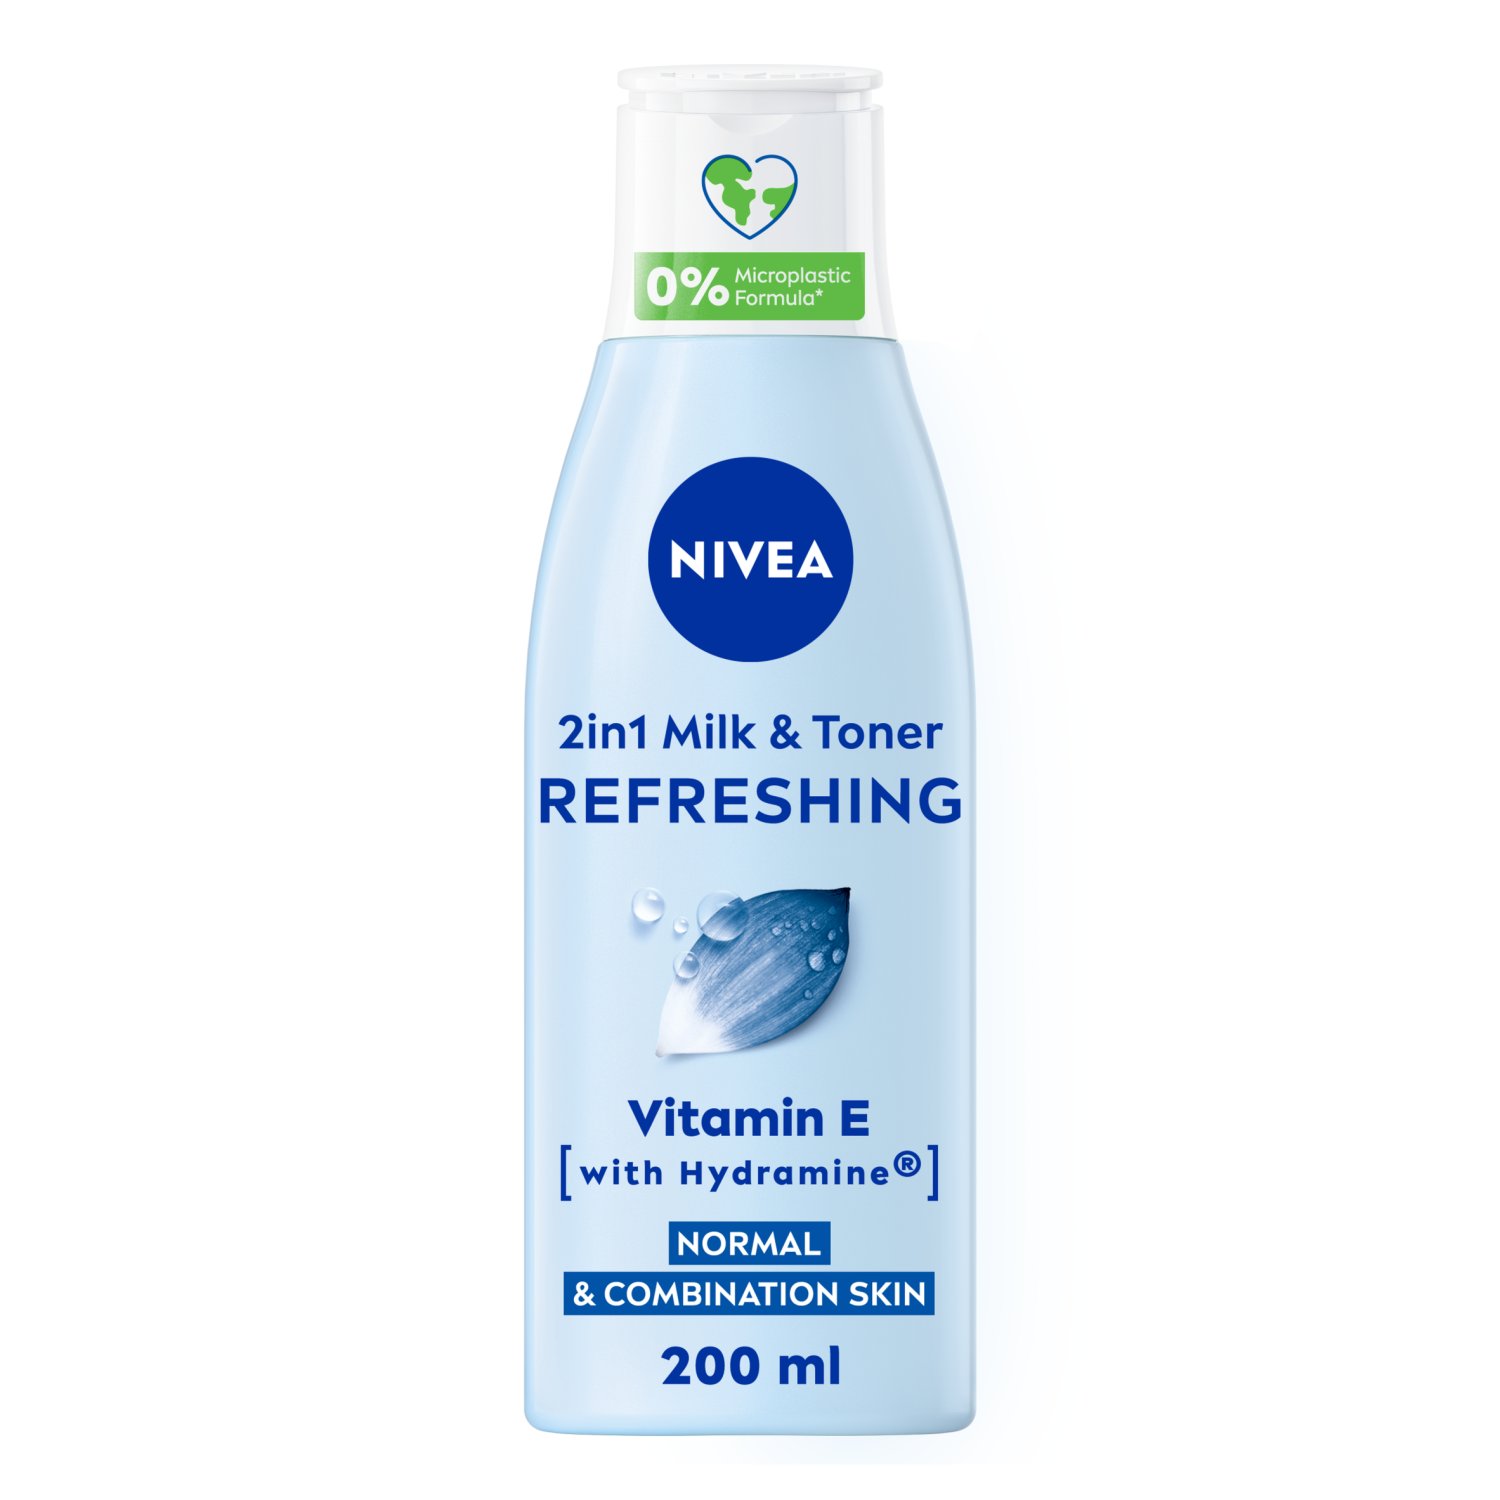 Nivea 2in1 Cleanser and Toner for Normal and Combination Skin (200 ml)